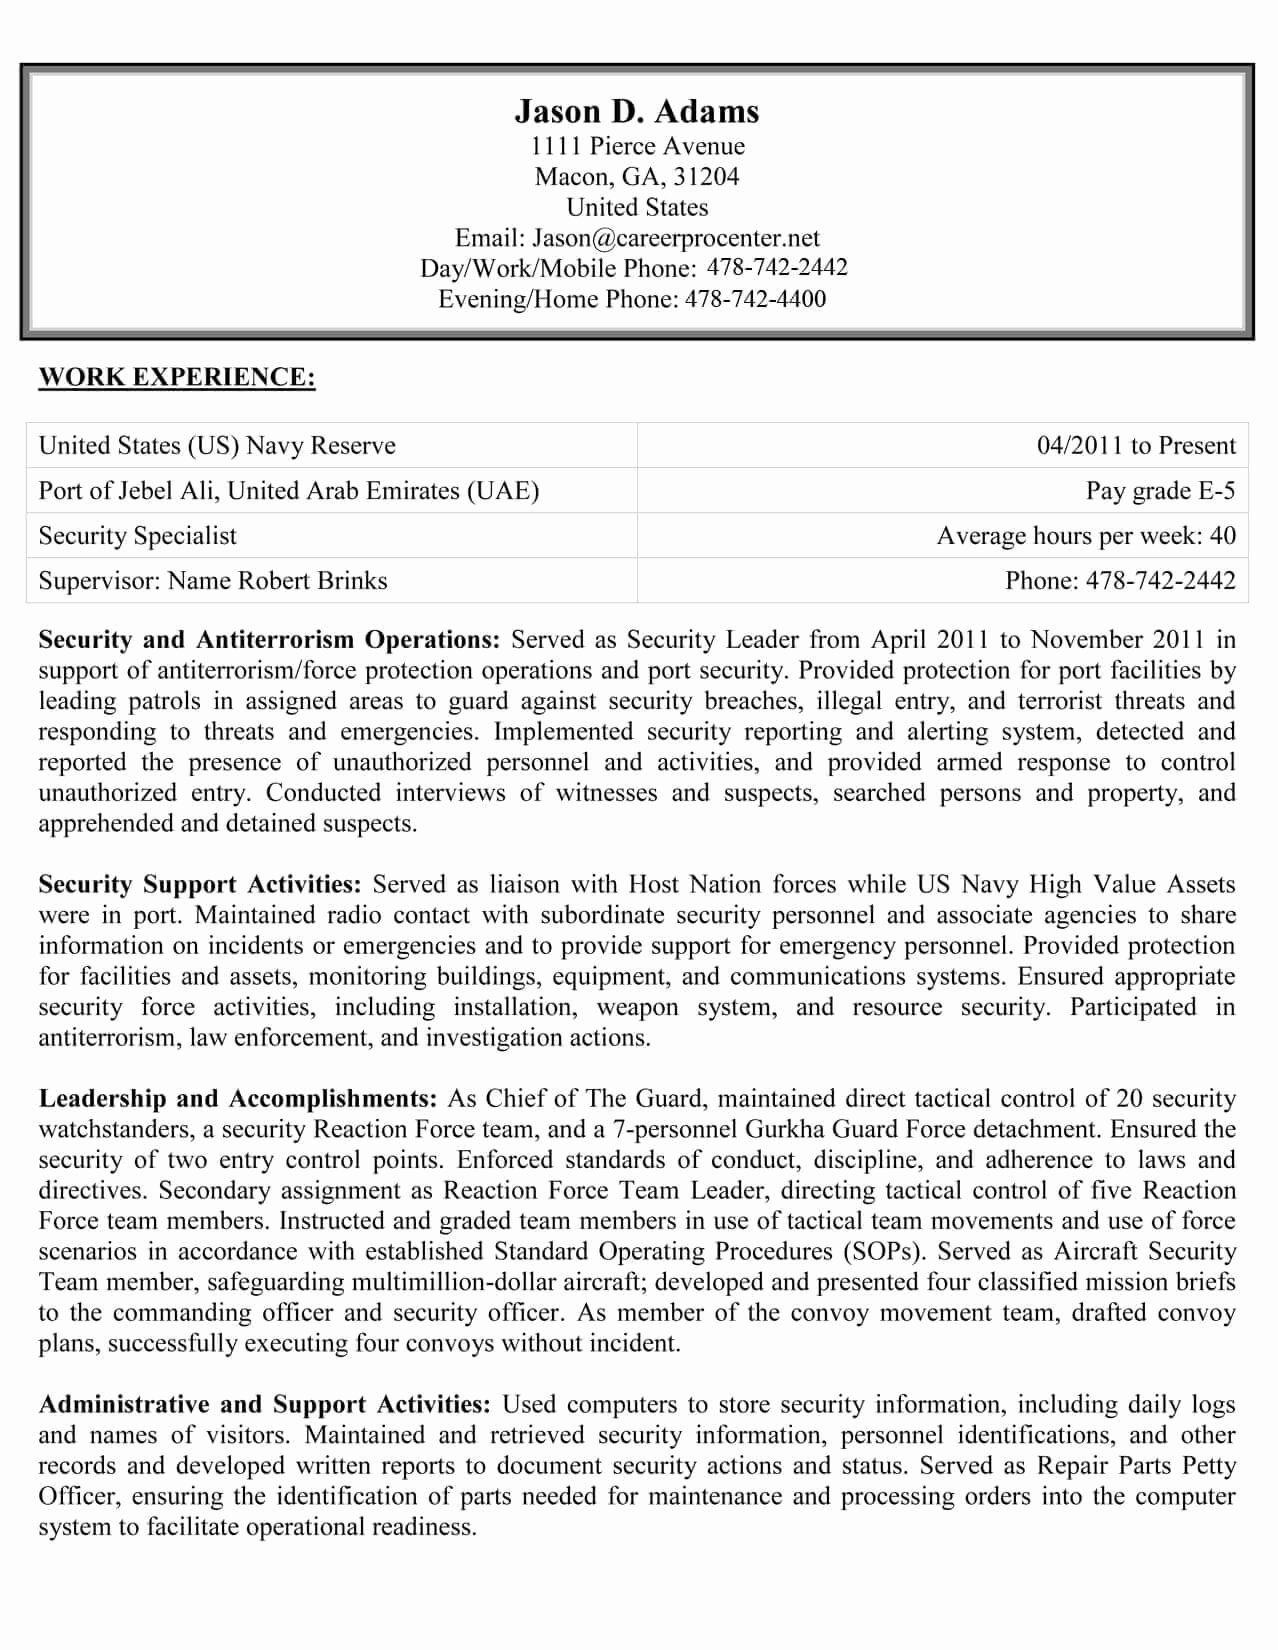 Sample Resumes for Federal Jobs Unique Federal &amp; Usajobs Resume Examples